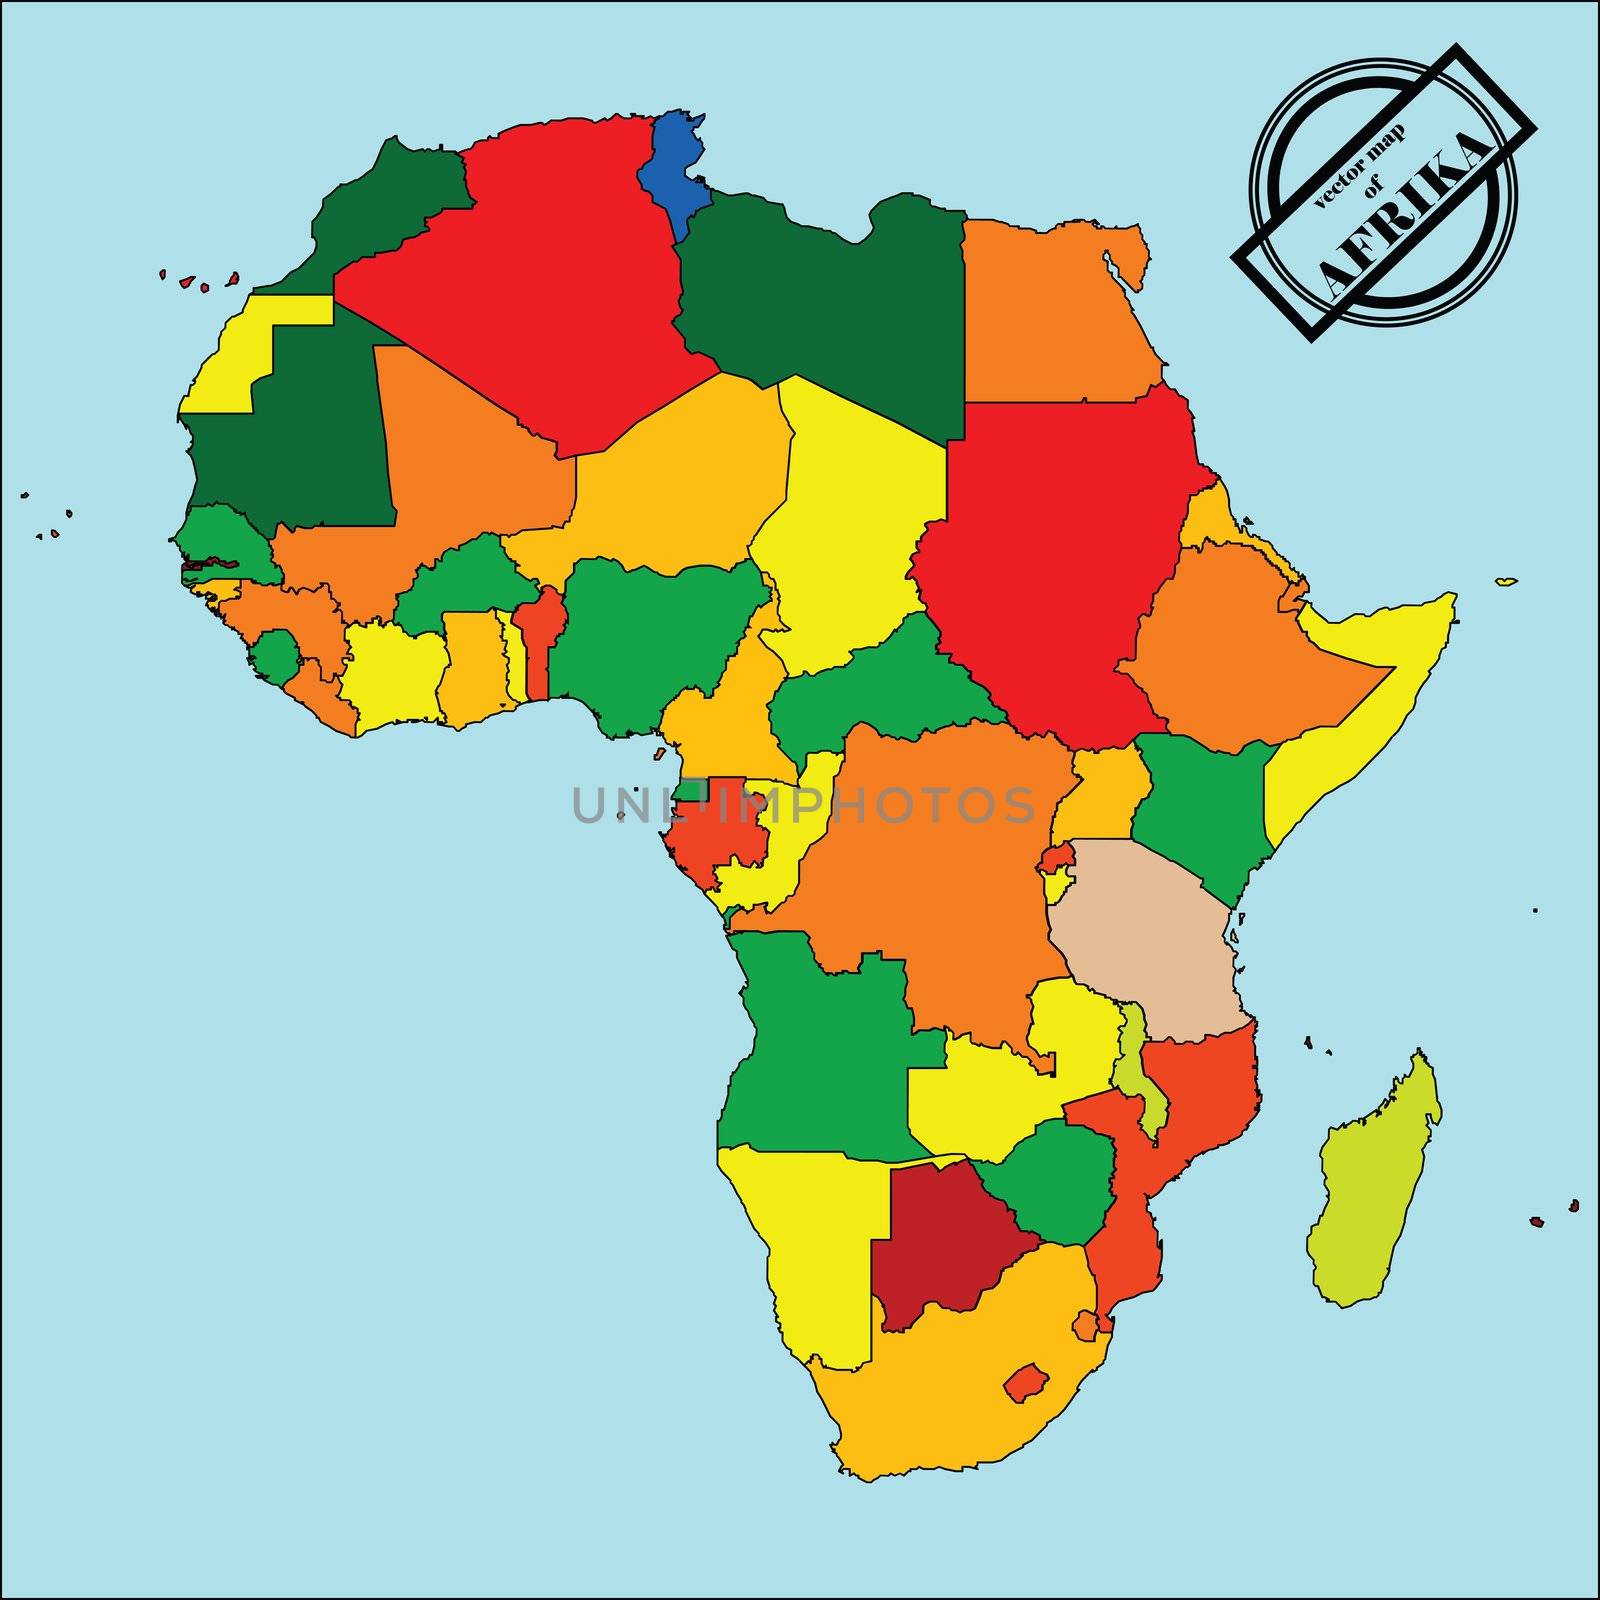 Map of africa by Lirch